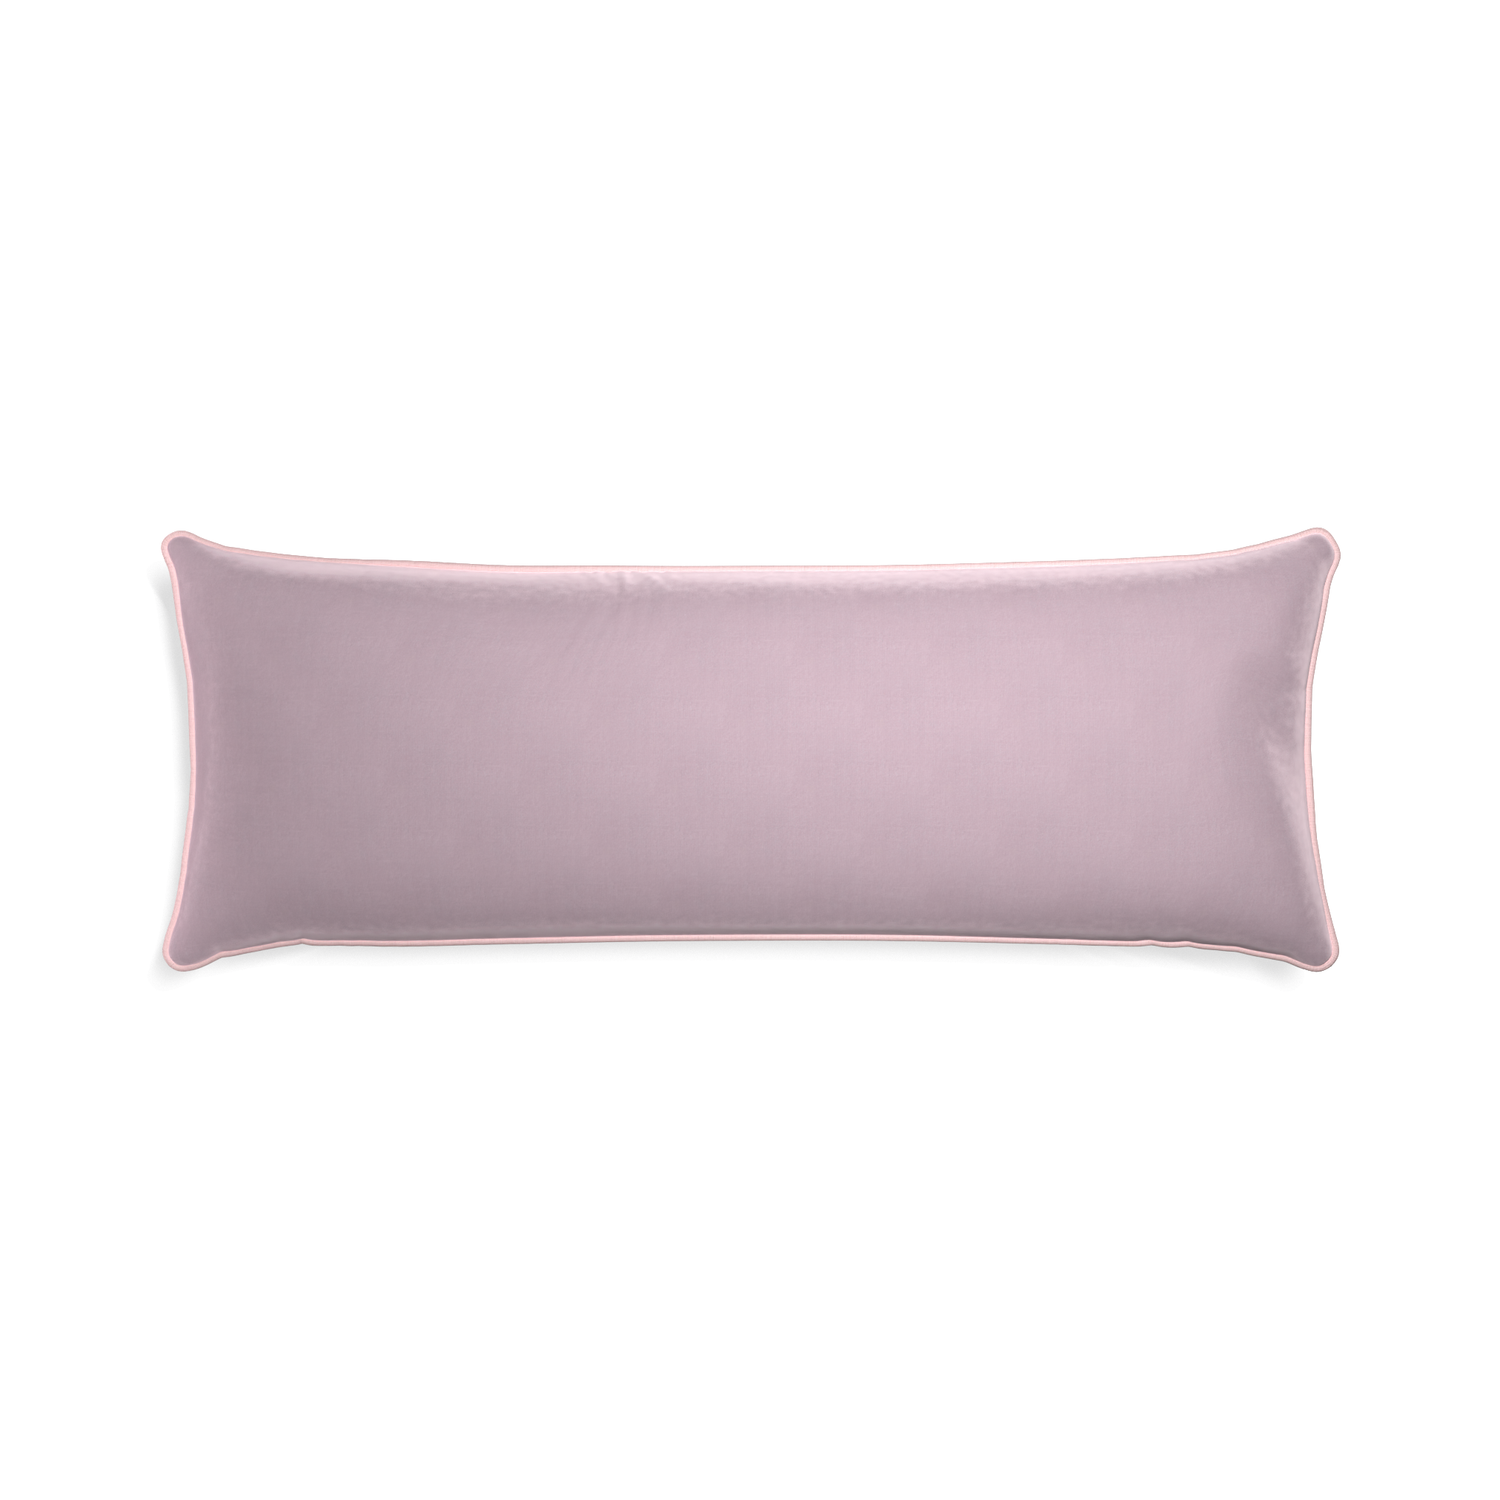 Xl-lumbar lilac velvet custom pillow with petal piping on white background